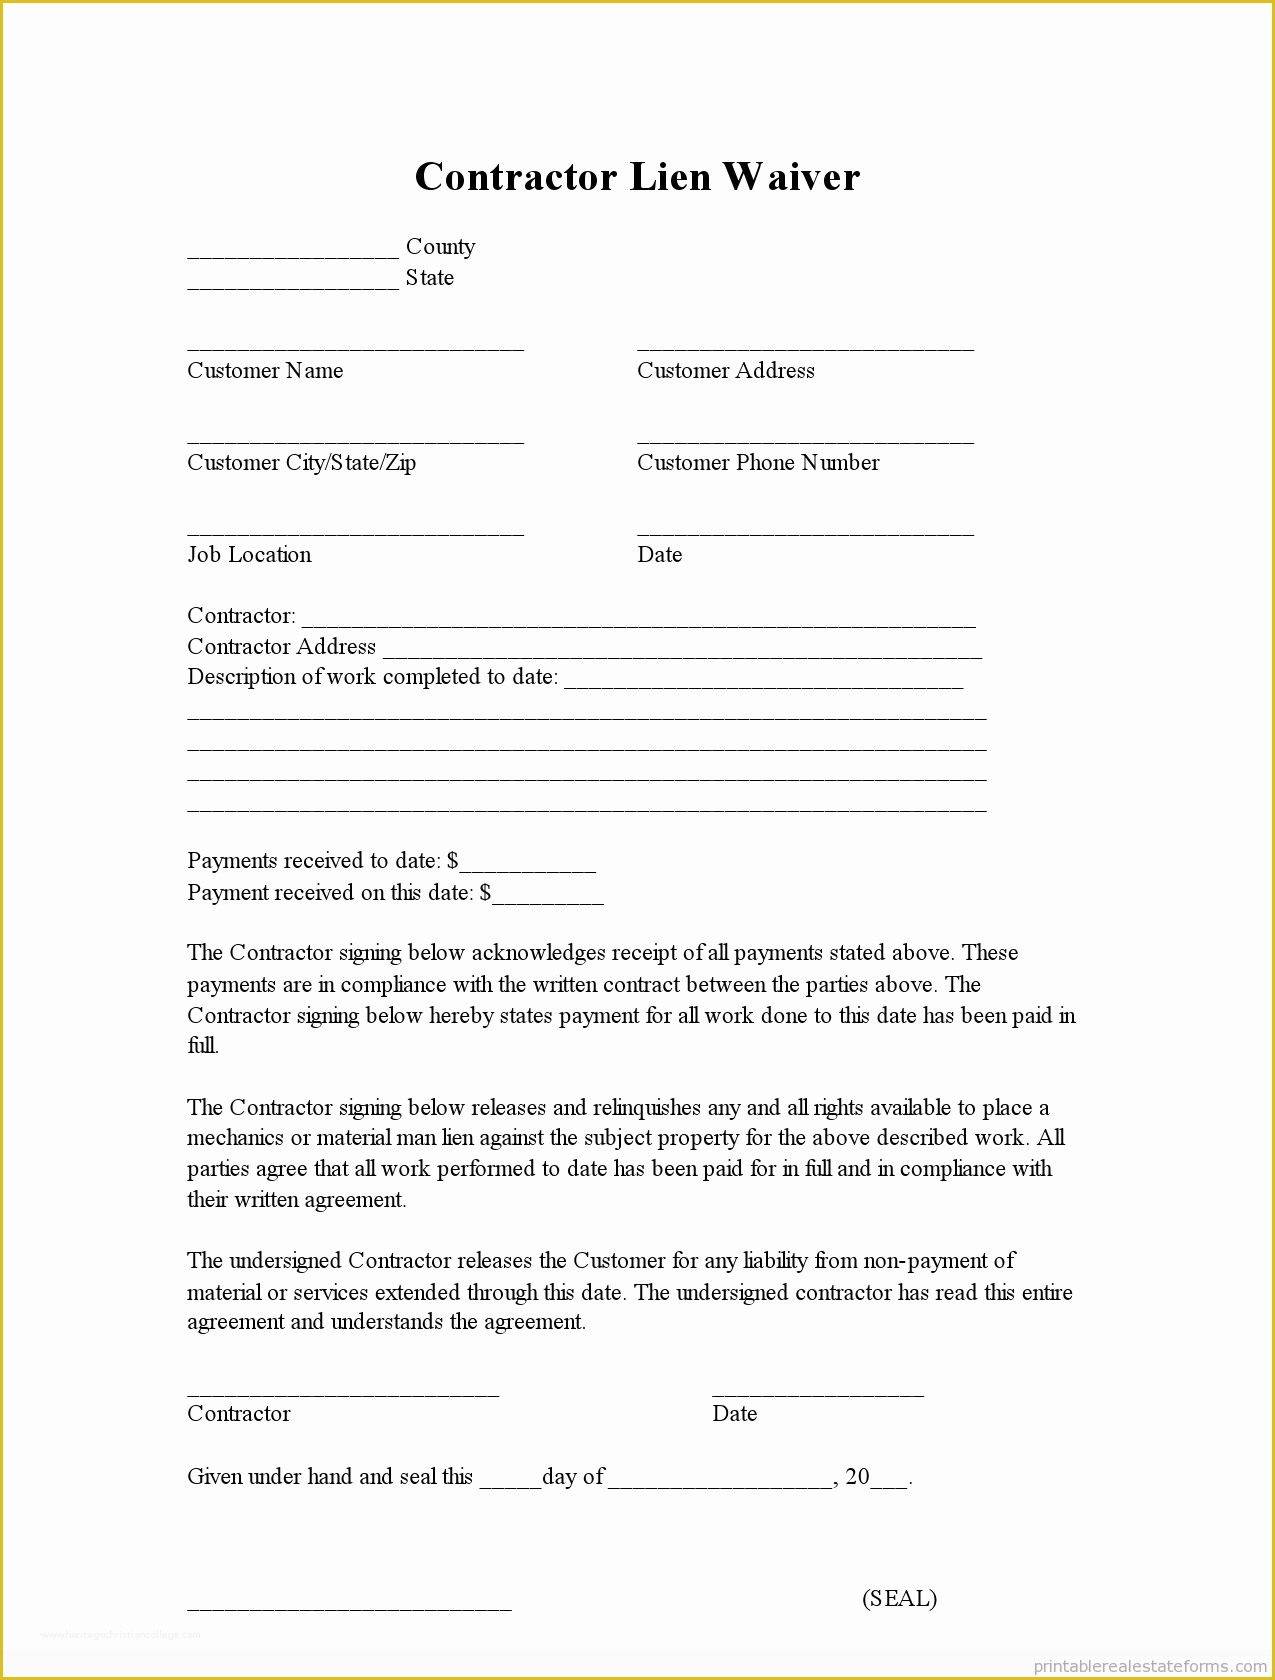 Free Lien Release form Template Of Sample Printable Contractor Lien Waiver form